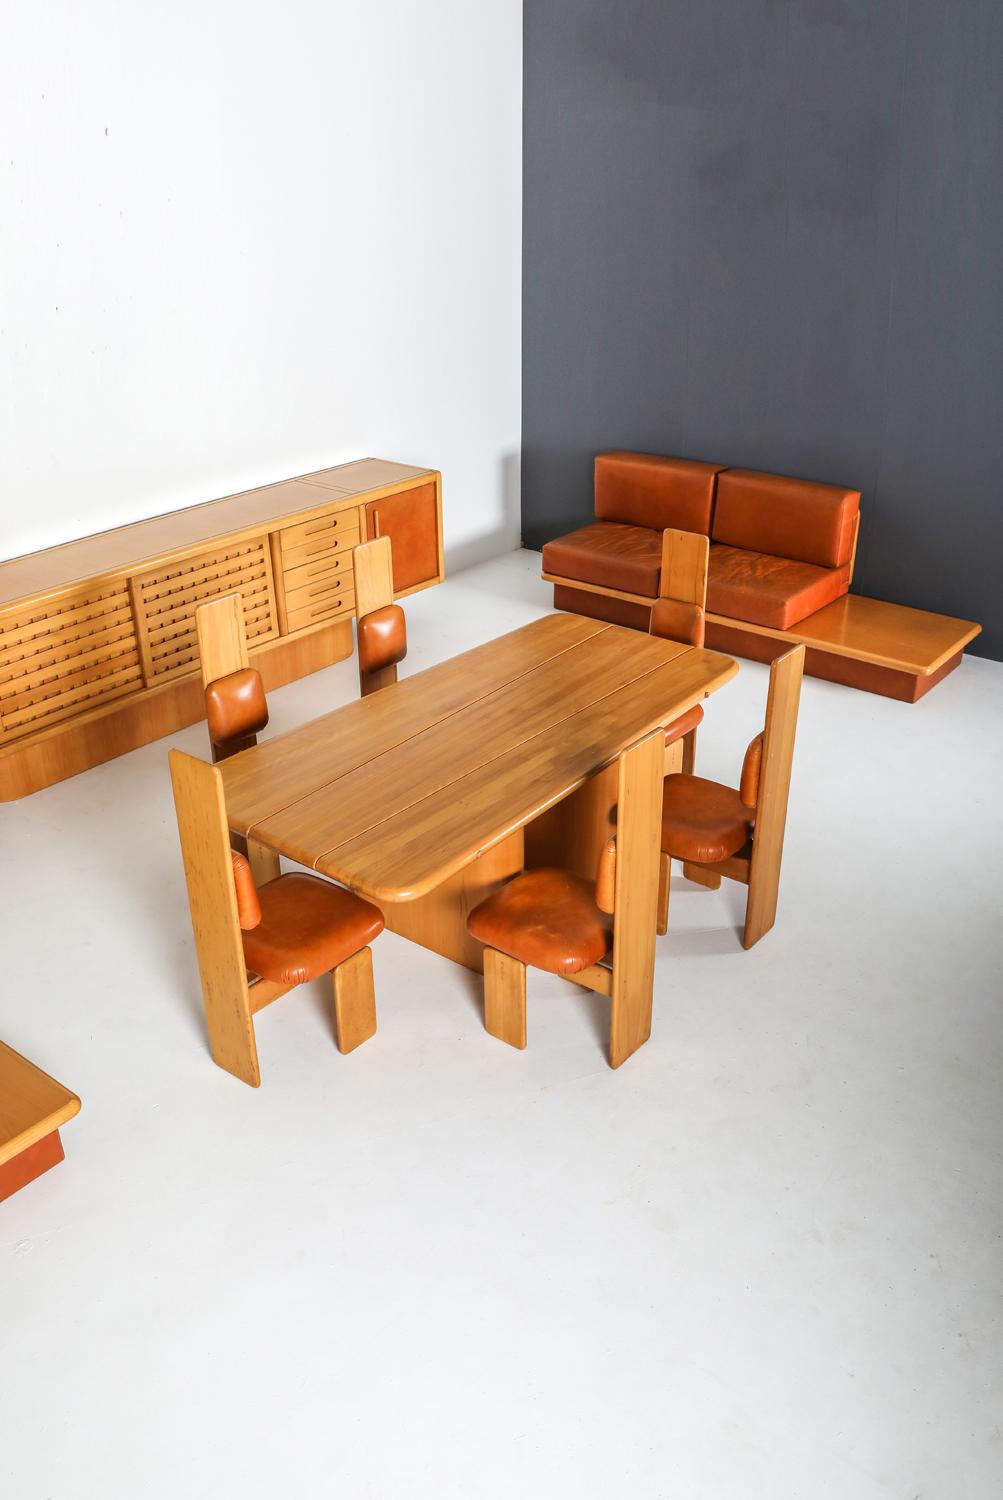 Beech and Leather Dining Room Set by Mario Marenco, Italy, 1970s For Sale 6